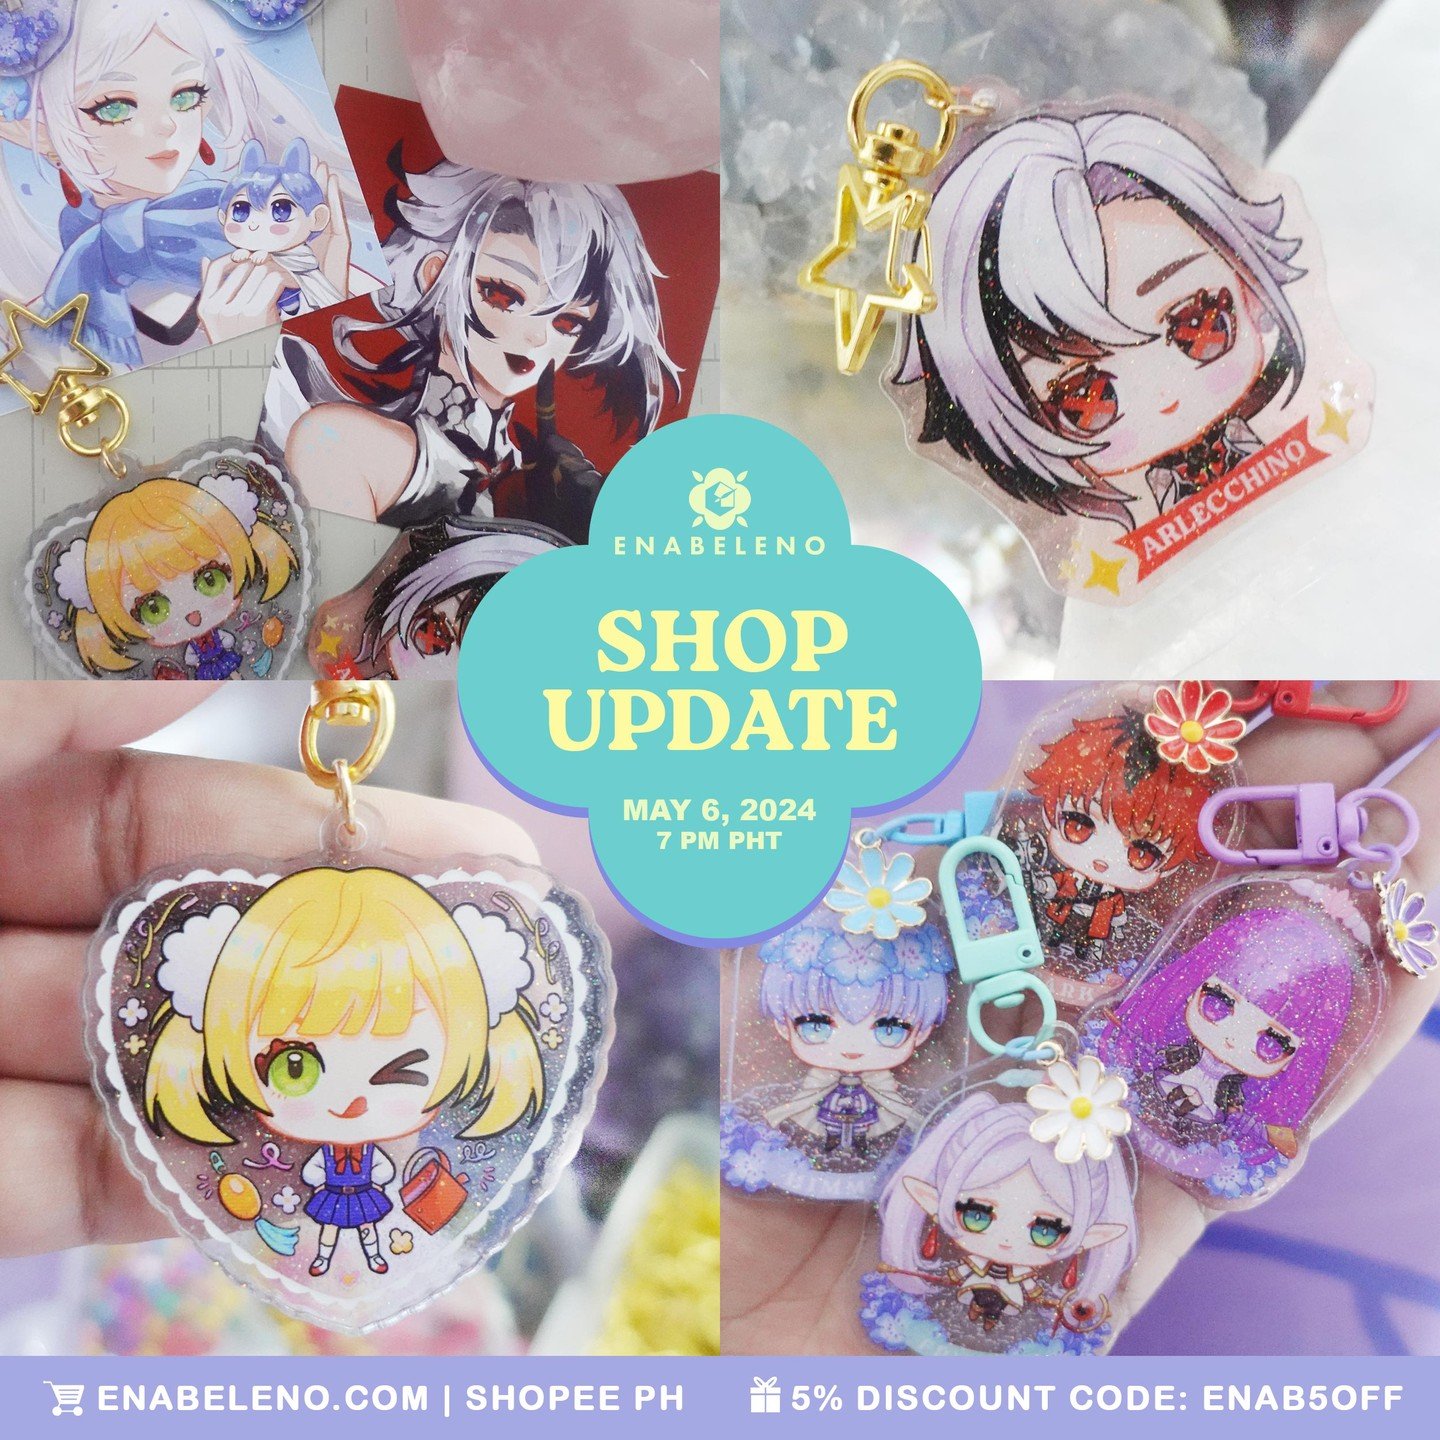 Shop Update happening today, May 6 at 7 PM PHT. Use the code ENAB5OFF upon checkout to get 5% discount on all items. 

🌸 Frieren, Himmel, Fern &amp; Stark Lotus Keychains
🌸 Frieren Sticker Pack
🌸 Loli God Keychains
🌸 Arlecchino Chibi Keychain
🌸 